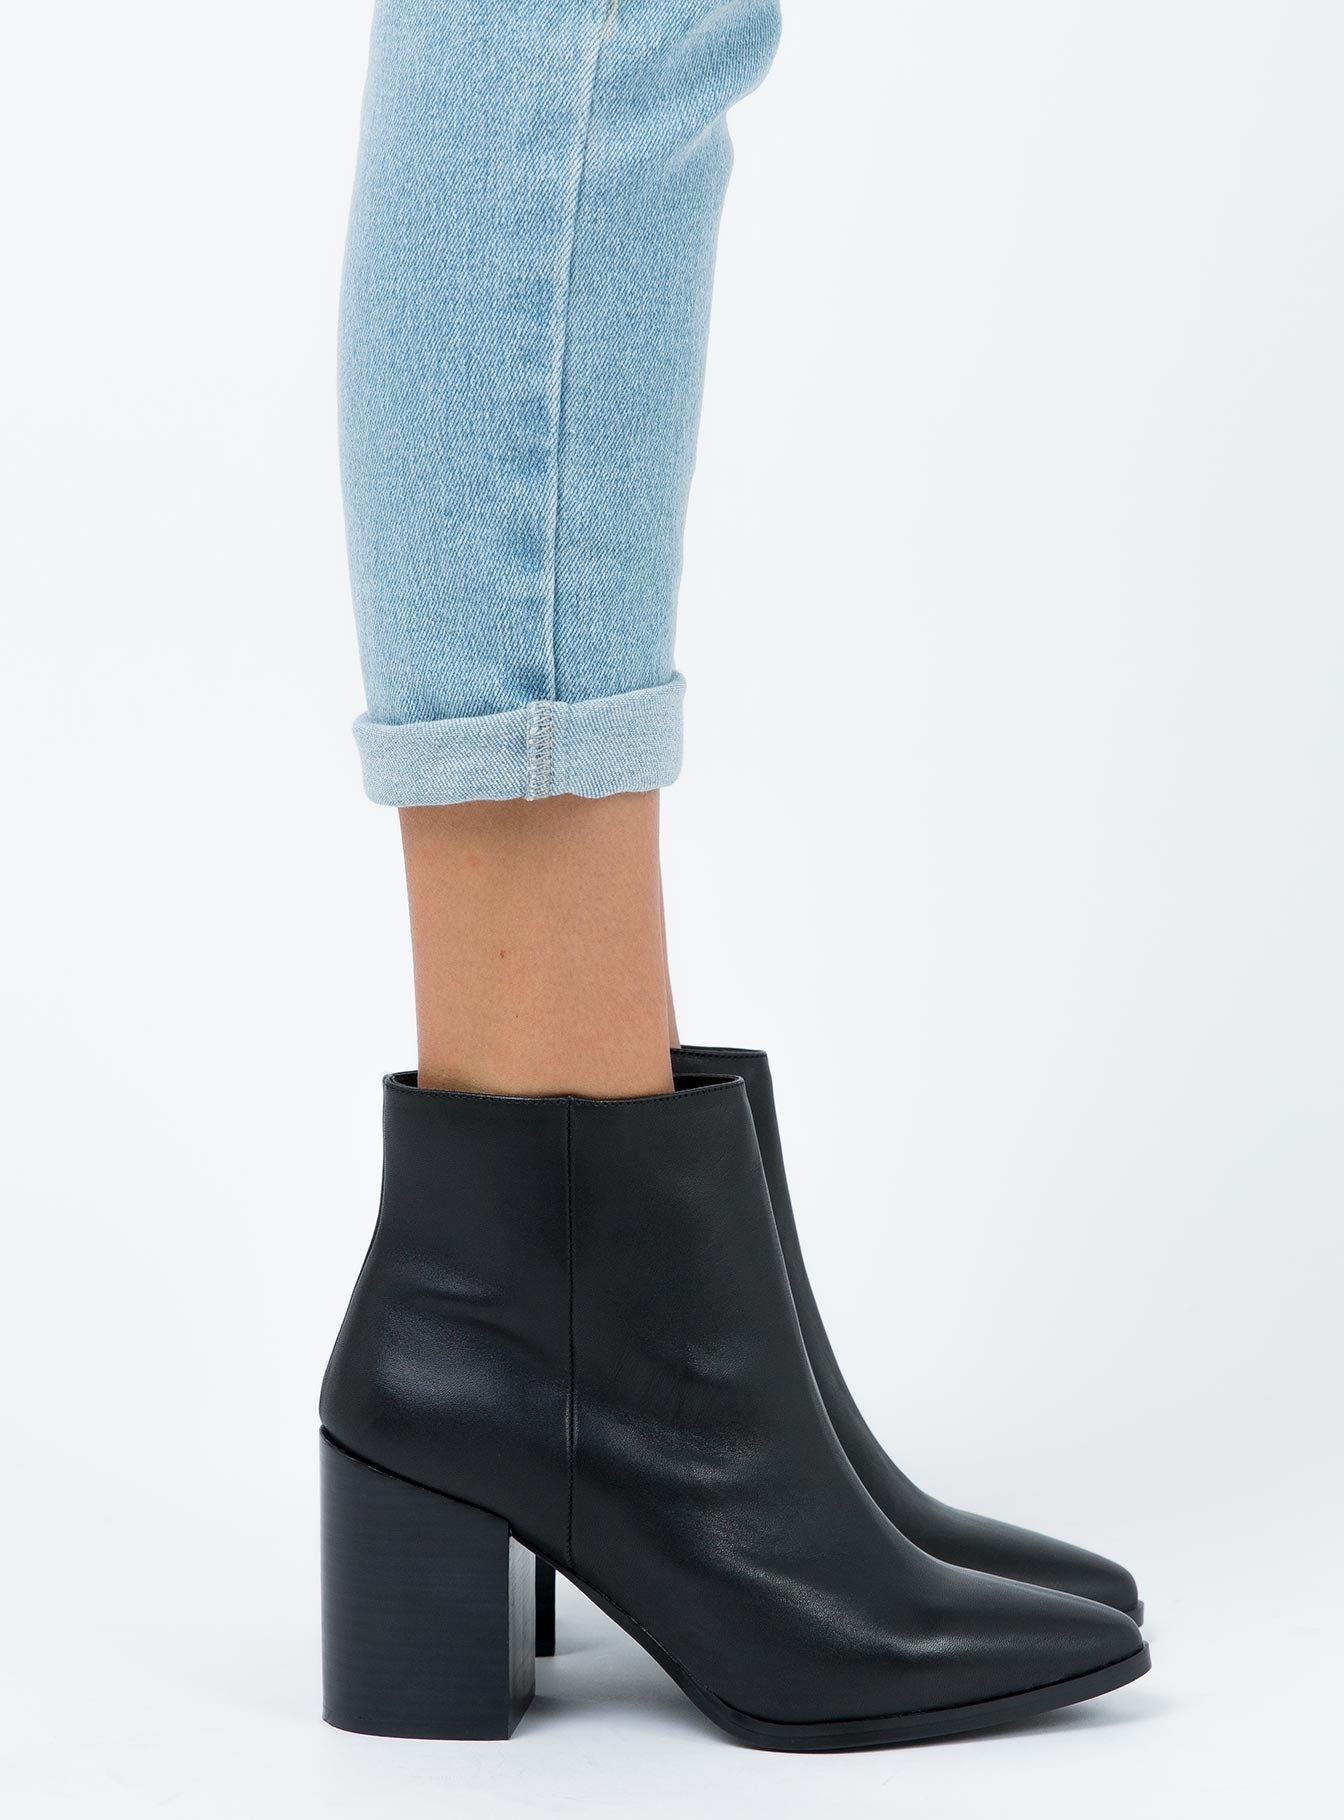 windsor smith ankle boots